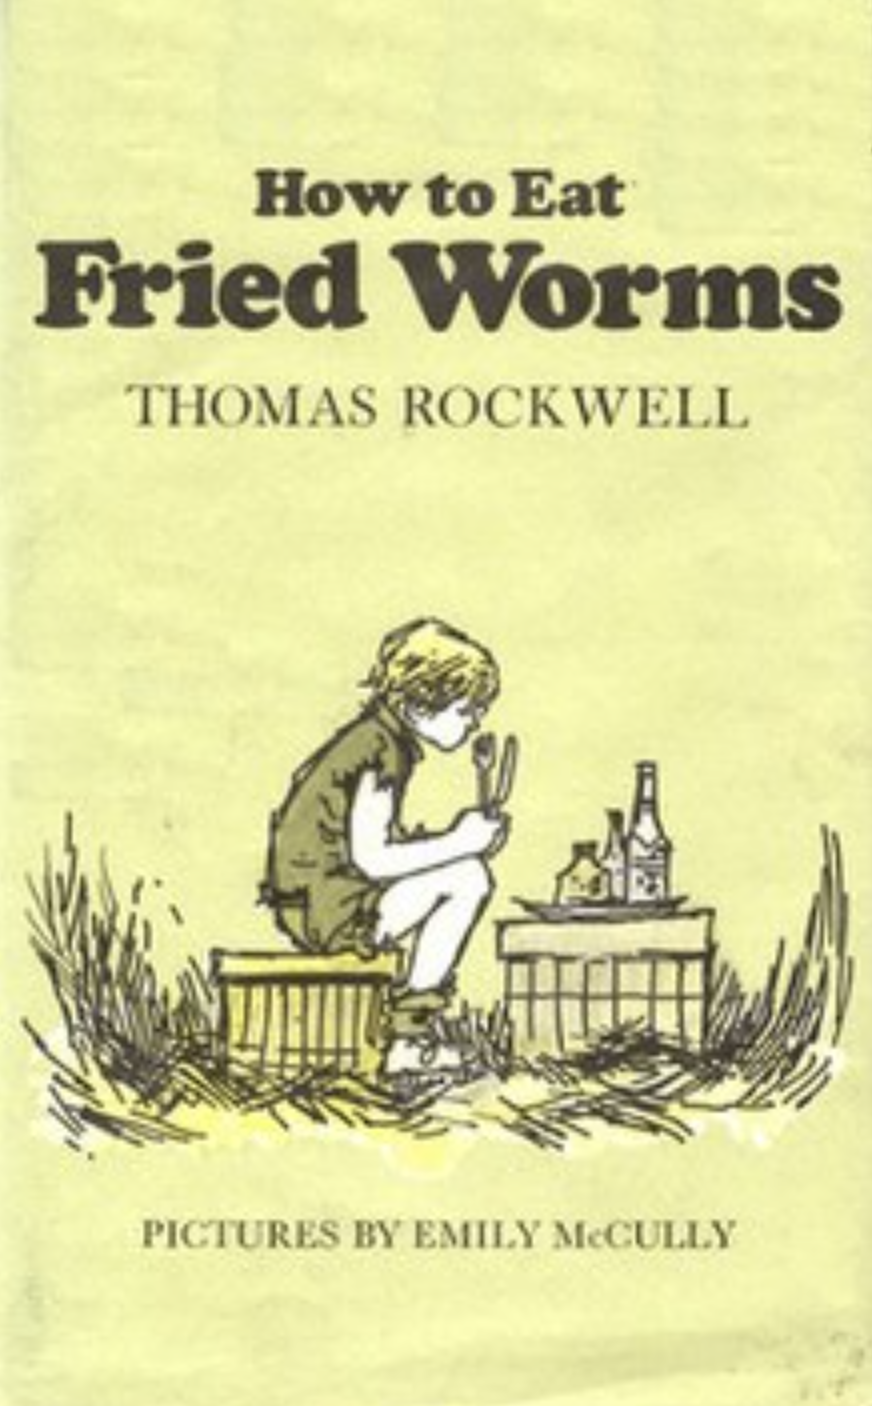 "How to Eat Fried Worms"